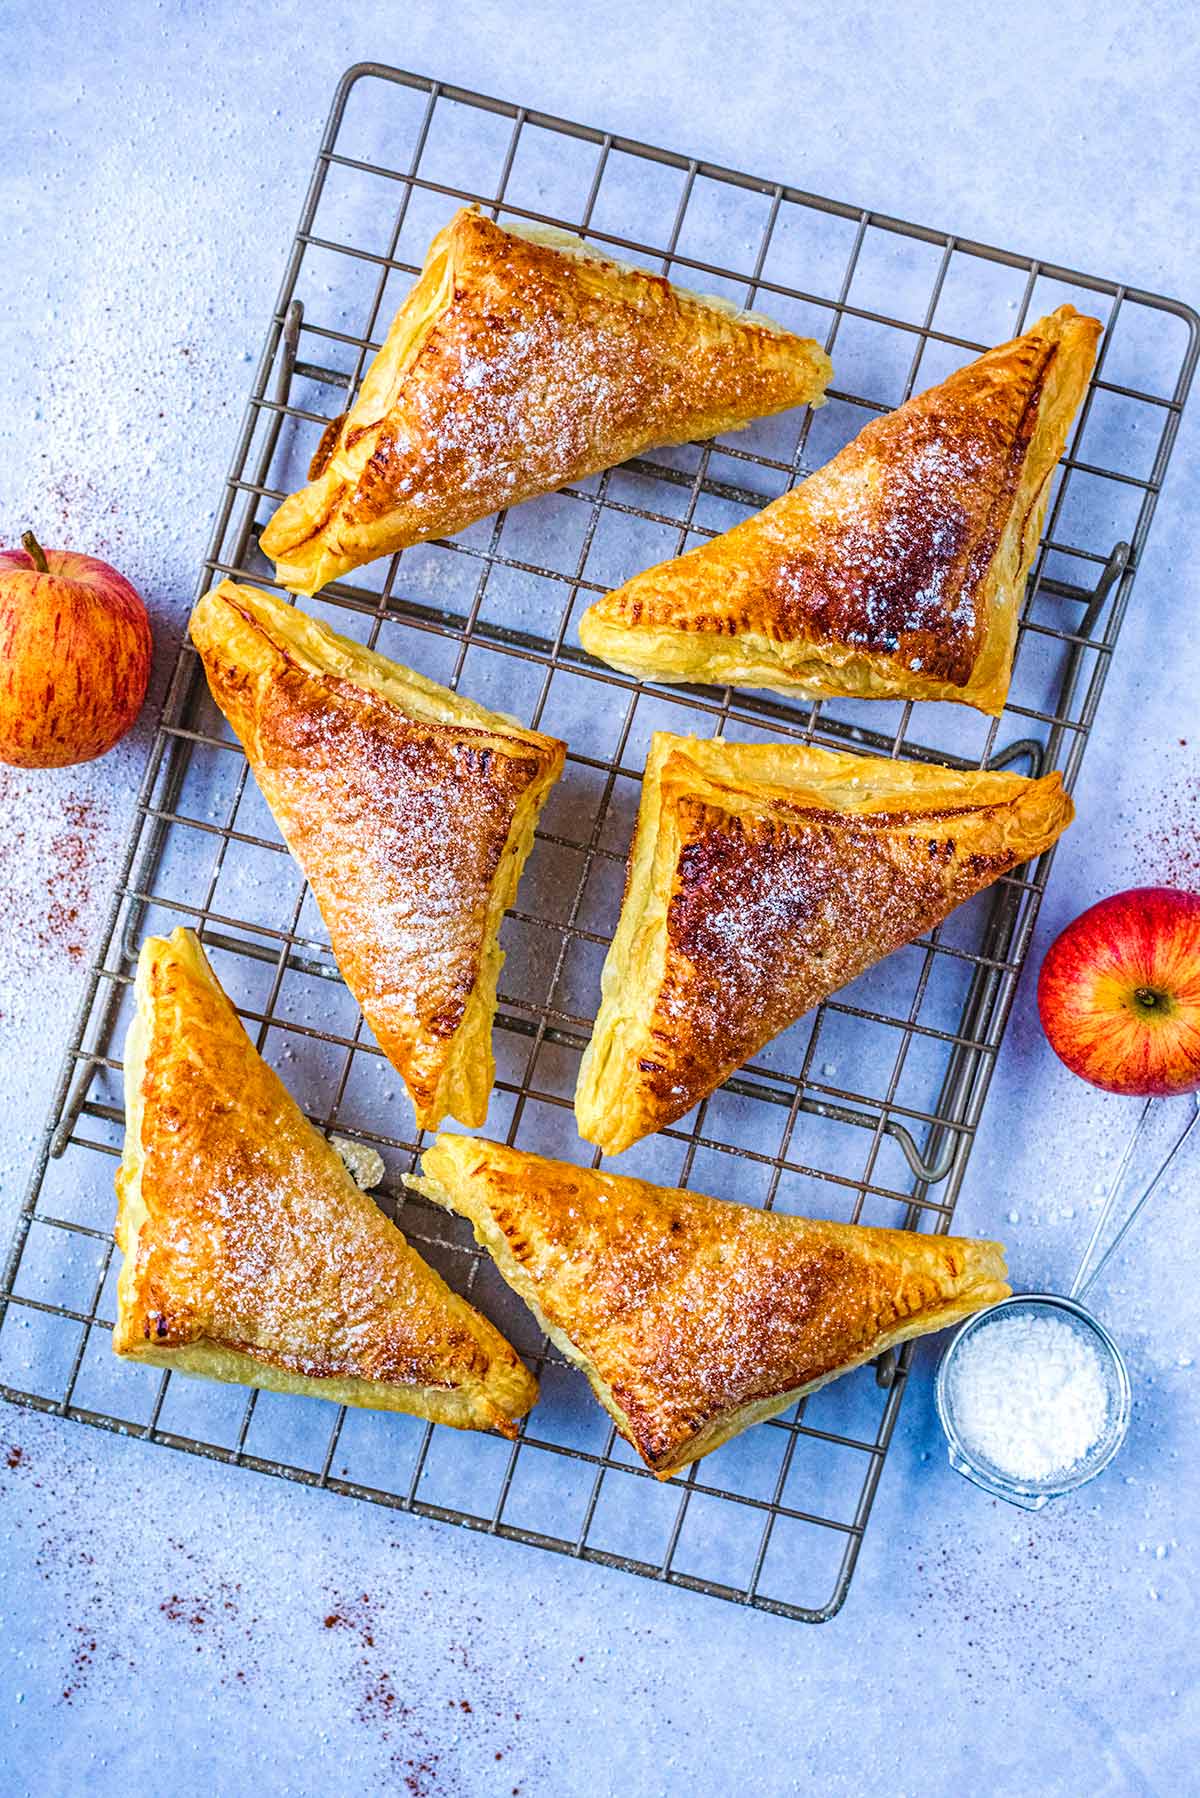 Six apple turnovers on a wire cooling rack.